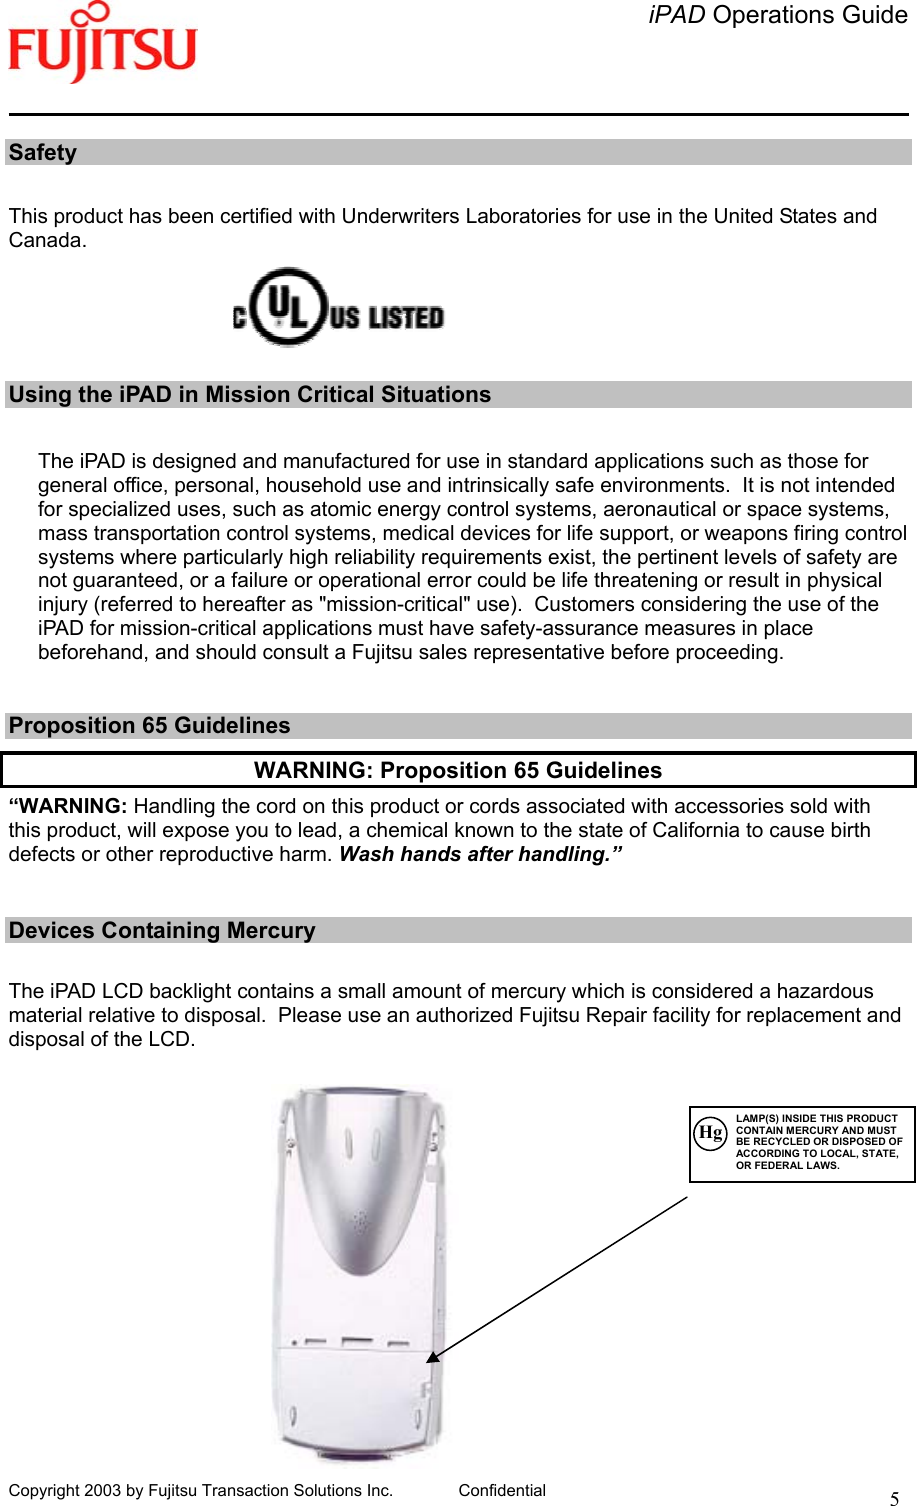   iPAD Operations Guide   Copyright 2003 by Fujitsu Transaction Solutions Inc. Confidential  5  Safety  This product has been certified with Underwriters Laboratories for use in the United States and Canada.      Using the iPAD in Mission Critical Situations  The iPAD is designed and manufactured for use in standard applications such as those for general office, personal, household use and intrinsically safe environments.  It is not intended for specialized uses, such as atomic energy control systems, aeronautical or space systems, mass transportation control systems, medical devices for life support, or weapons firing control systems where particularly high reliability requirements exist, the pertinent levels of safety are not guaranteed, or a failure or operational error could be life threatening or result in physical injury (referred to hereafter as &quot;mission-critical&quot; use).  Customers considering the use of the iPAD for mission-critical applications must have safety-assurance measures in place beforehand, and should consult a Fujitsu sales representative before proceeding.     Proposition 65 Guidelines WARNING: Proposition 65 Guidelines “WARNING: Handling the cord on this product or cords associated with accessories sold with this product, will expose you to lead, a chemical known to the state of California to cause birth defects or other reproductive harm. Wash hands after handling.”   Devices Containing Mercury   The iPAD LCD backlight contains a small amount of mercury which is considered a hazardous material relative to disposal.  Please use an authorized Fujitsu Repair facility for replacement and disposal of the LCD.            Hg LAMP(S) INSIDE THIS PRODUCT CONTAIN MERCURY AND MUST BE RECYCLED OR DISPOSED OF ACCORDING TO LOCAL, STATE, OR FEDERAL LAWS. 